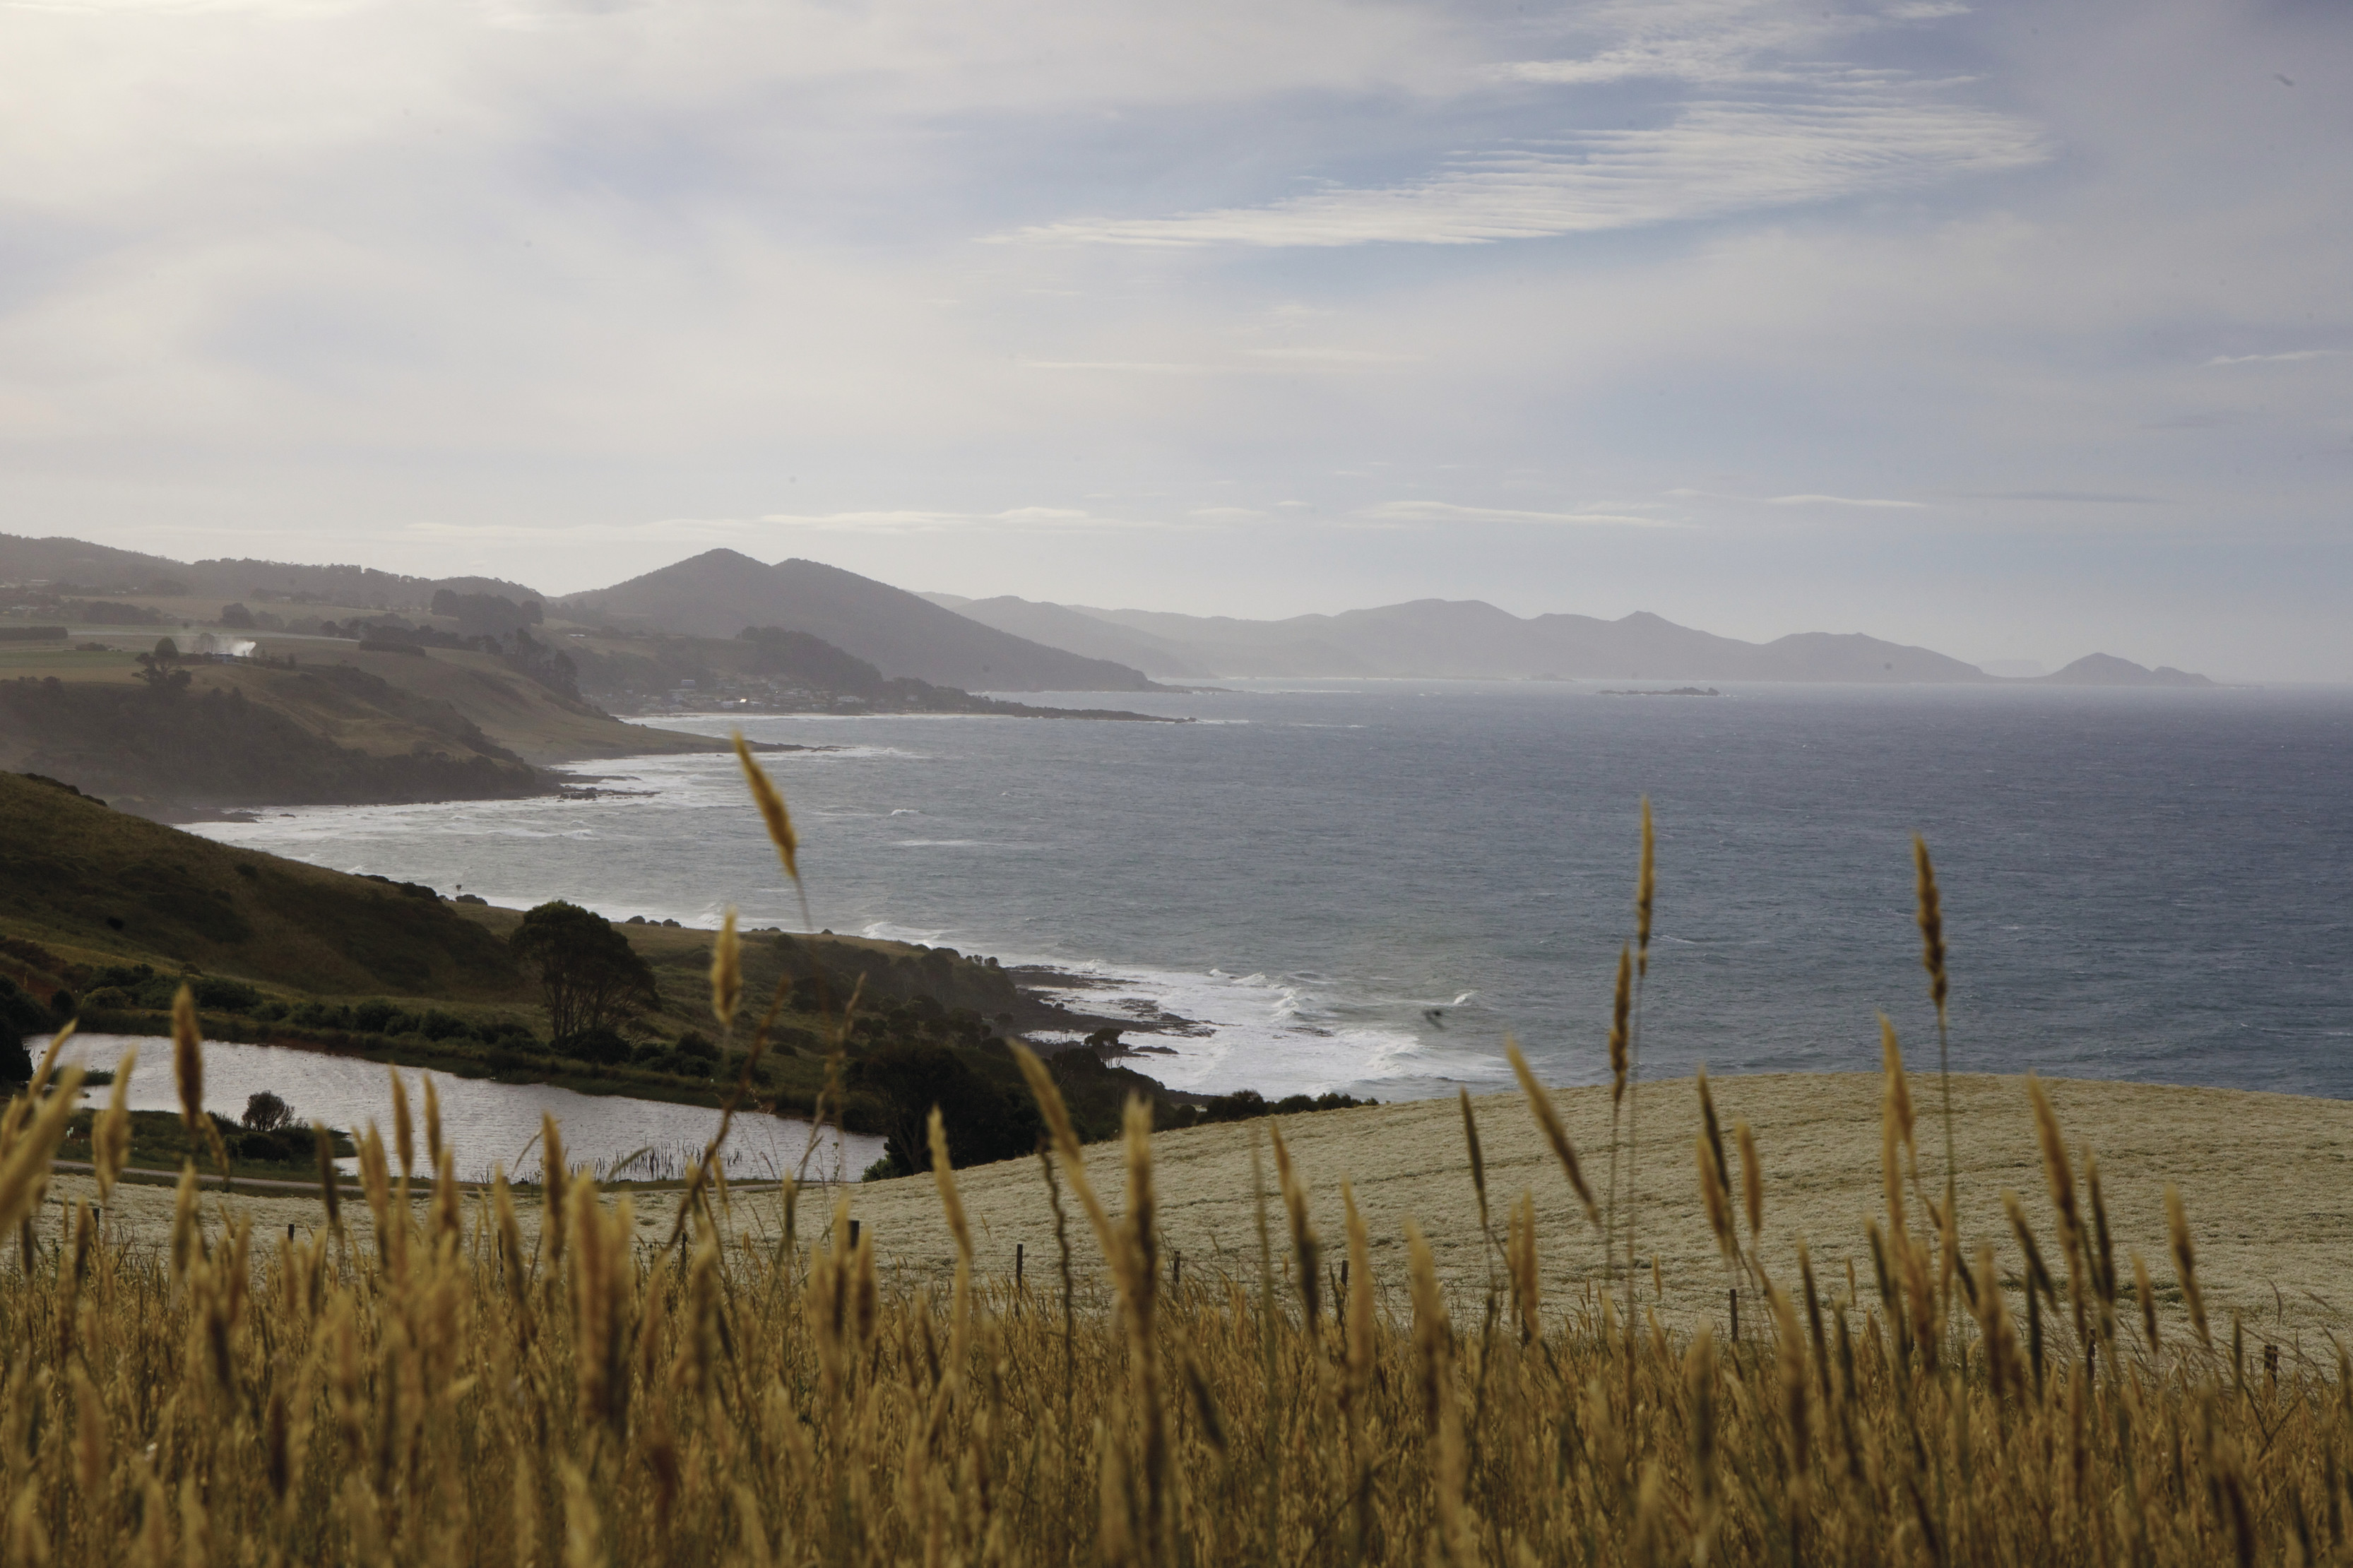 A Picturesque image of Table Cape. A stunning coastline captured through a valley of reeds.